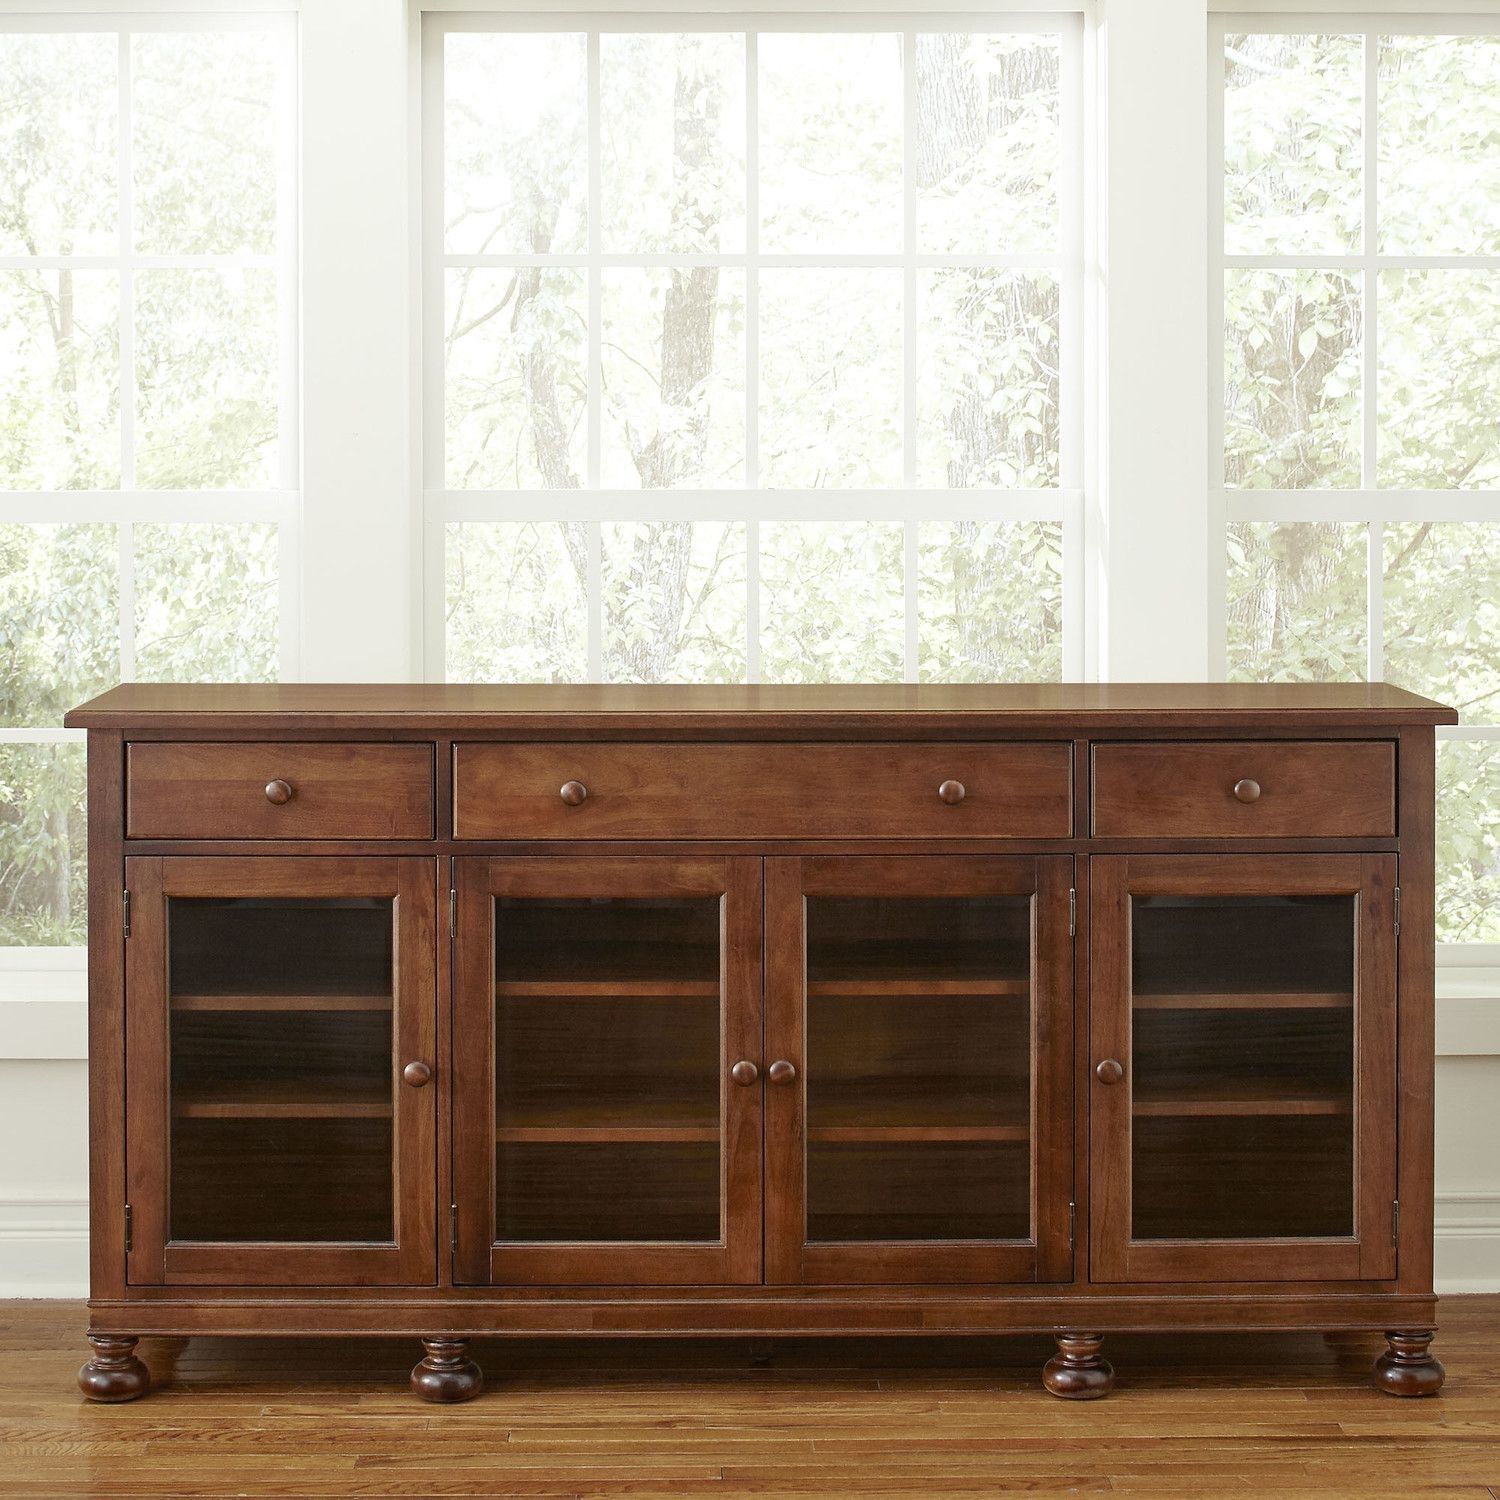 Fordham Custom Sideboard | Crafted To Complement A Custom Dining With Regard To Best And Newest Walnut Finish Crown Moulding Sideboards (View 17 of 20)